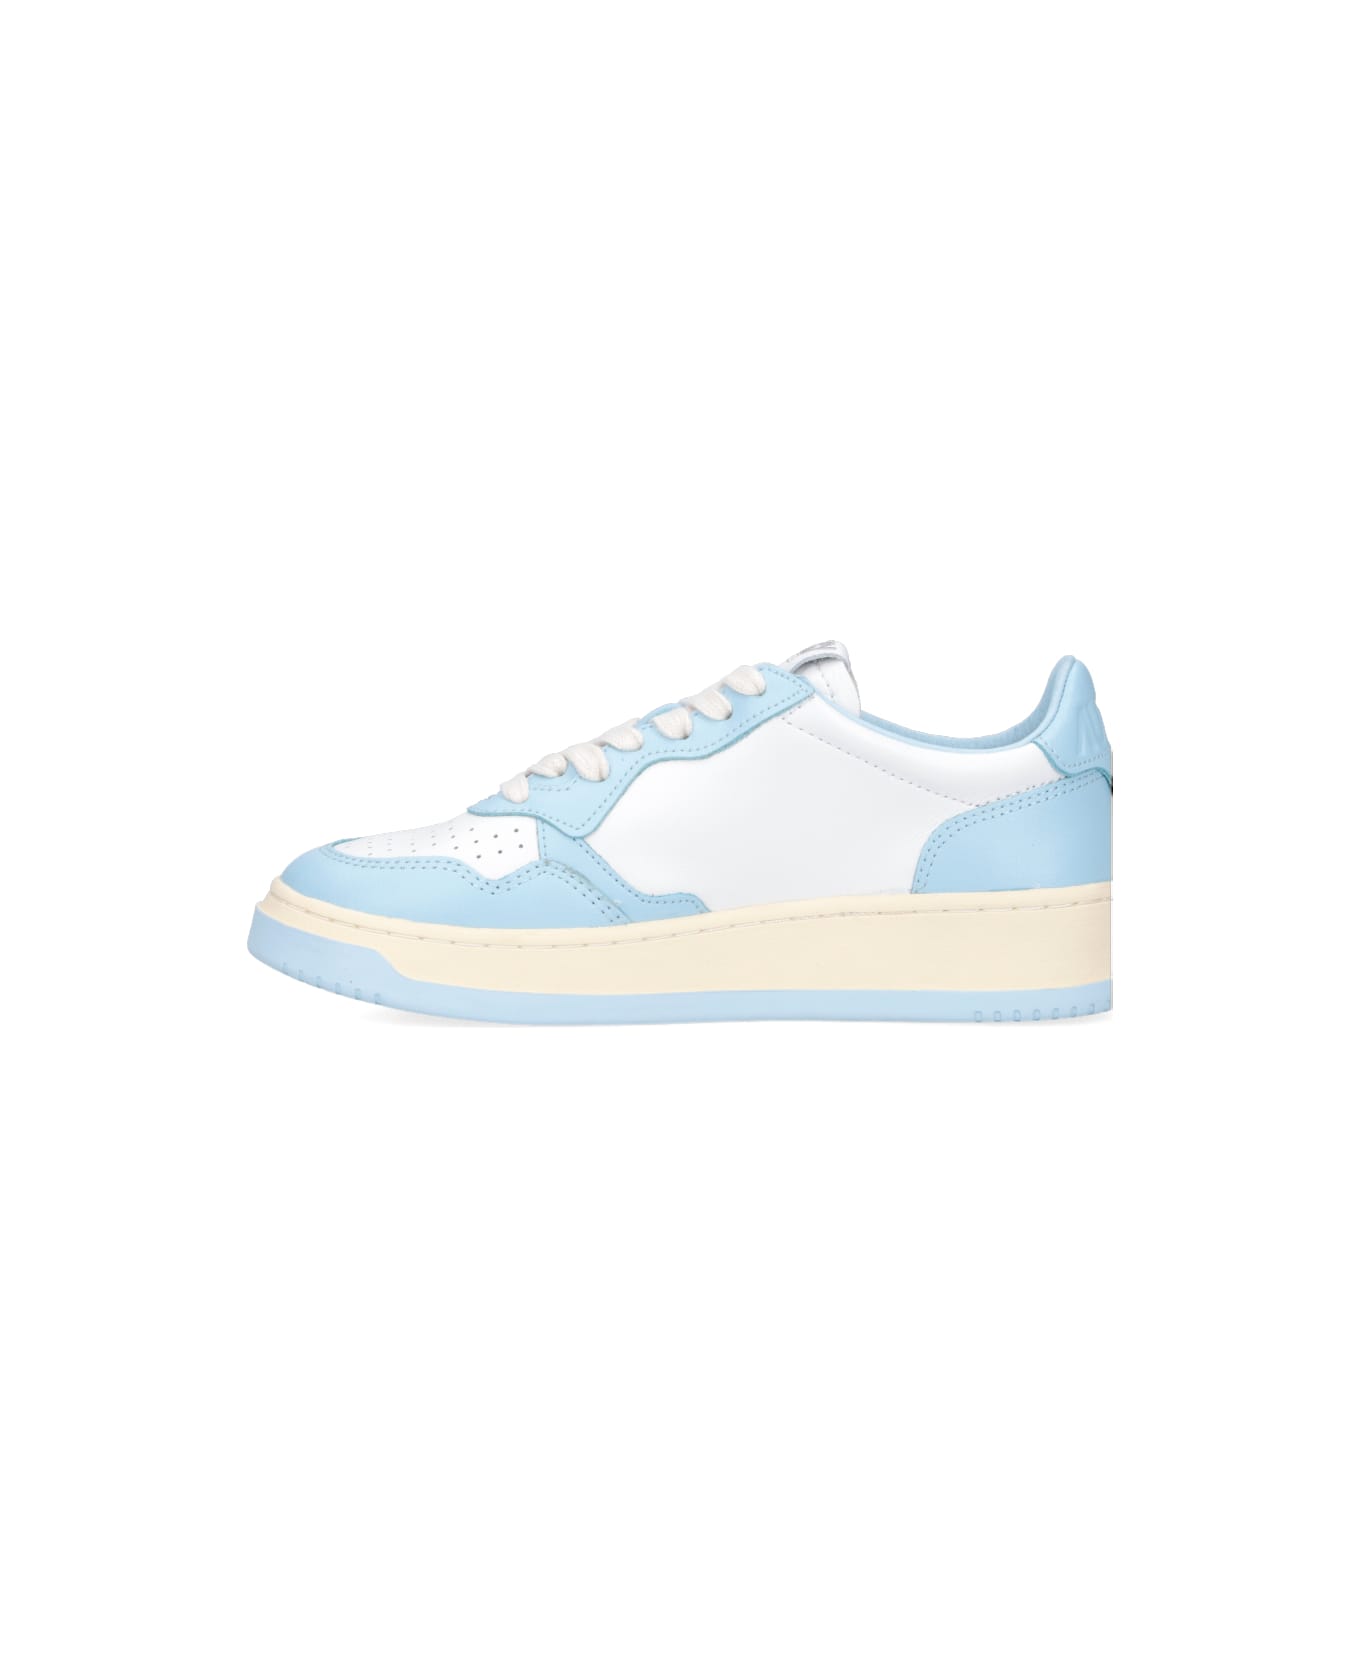 Autry Low "medalist" Sneakers - Light Blue スニーカー